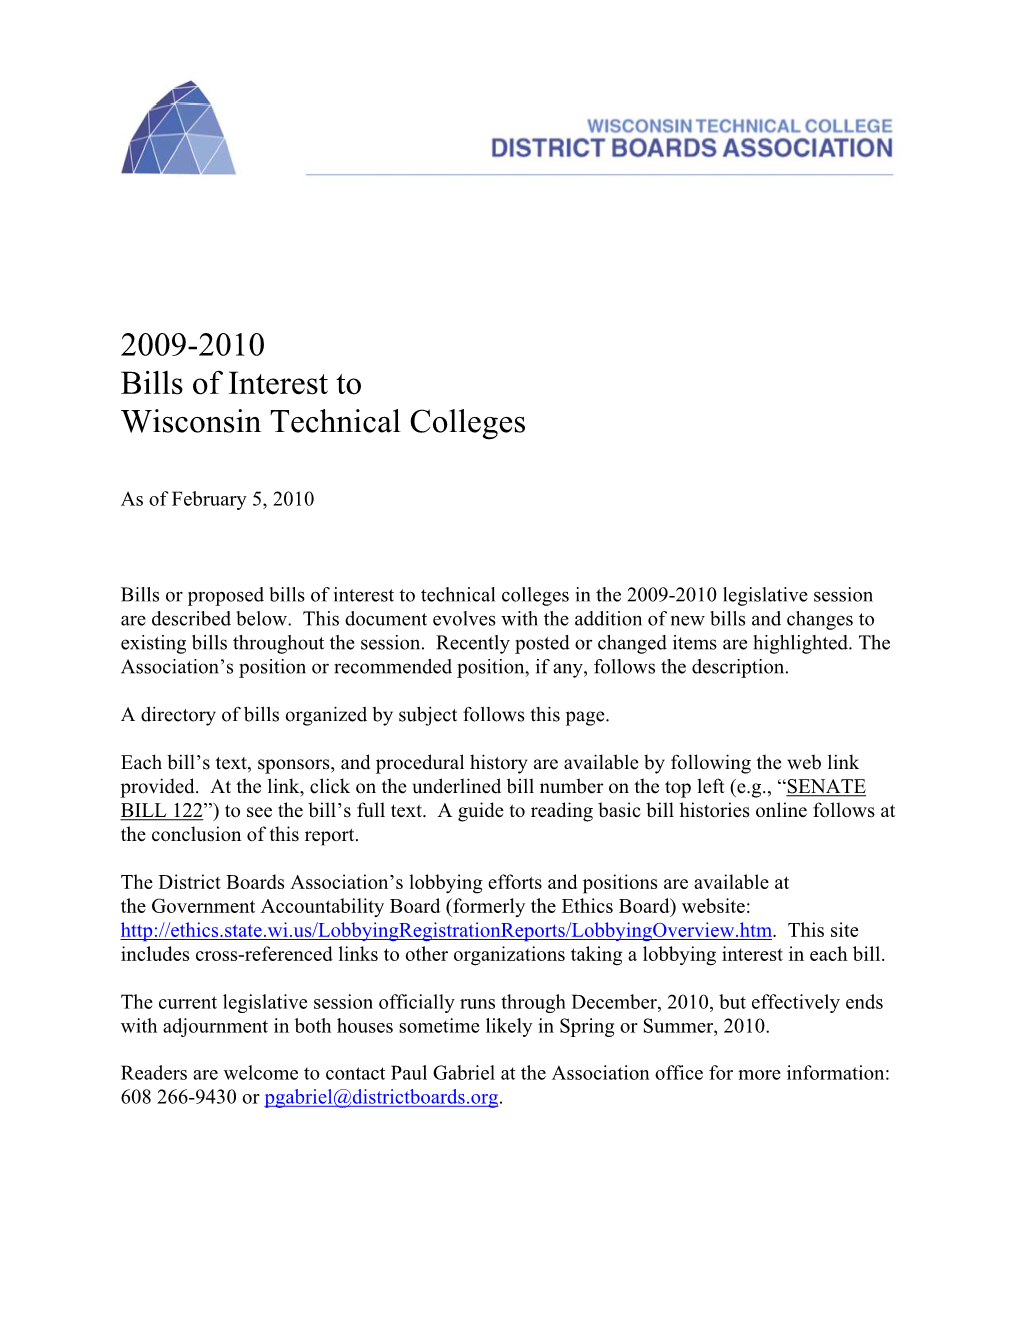 2009-2010 Bills of Interest to Wisconsin Technical Colleges